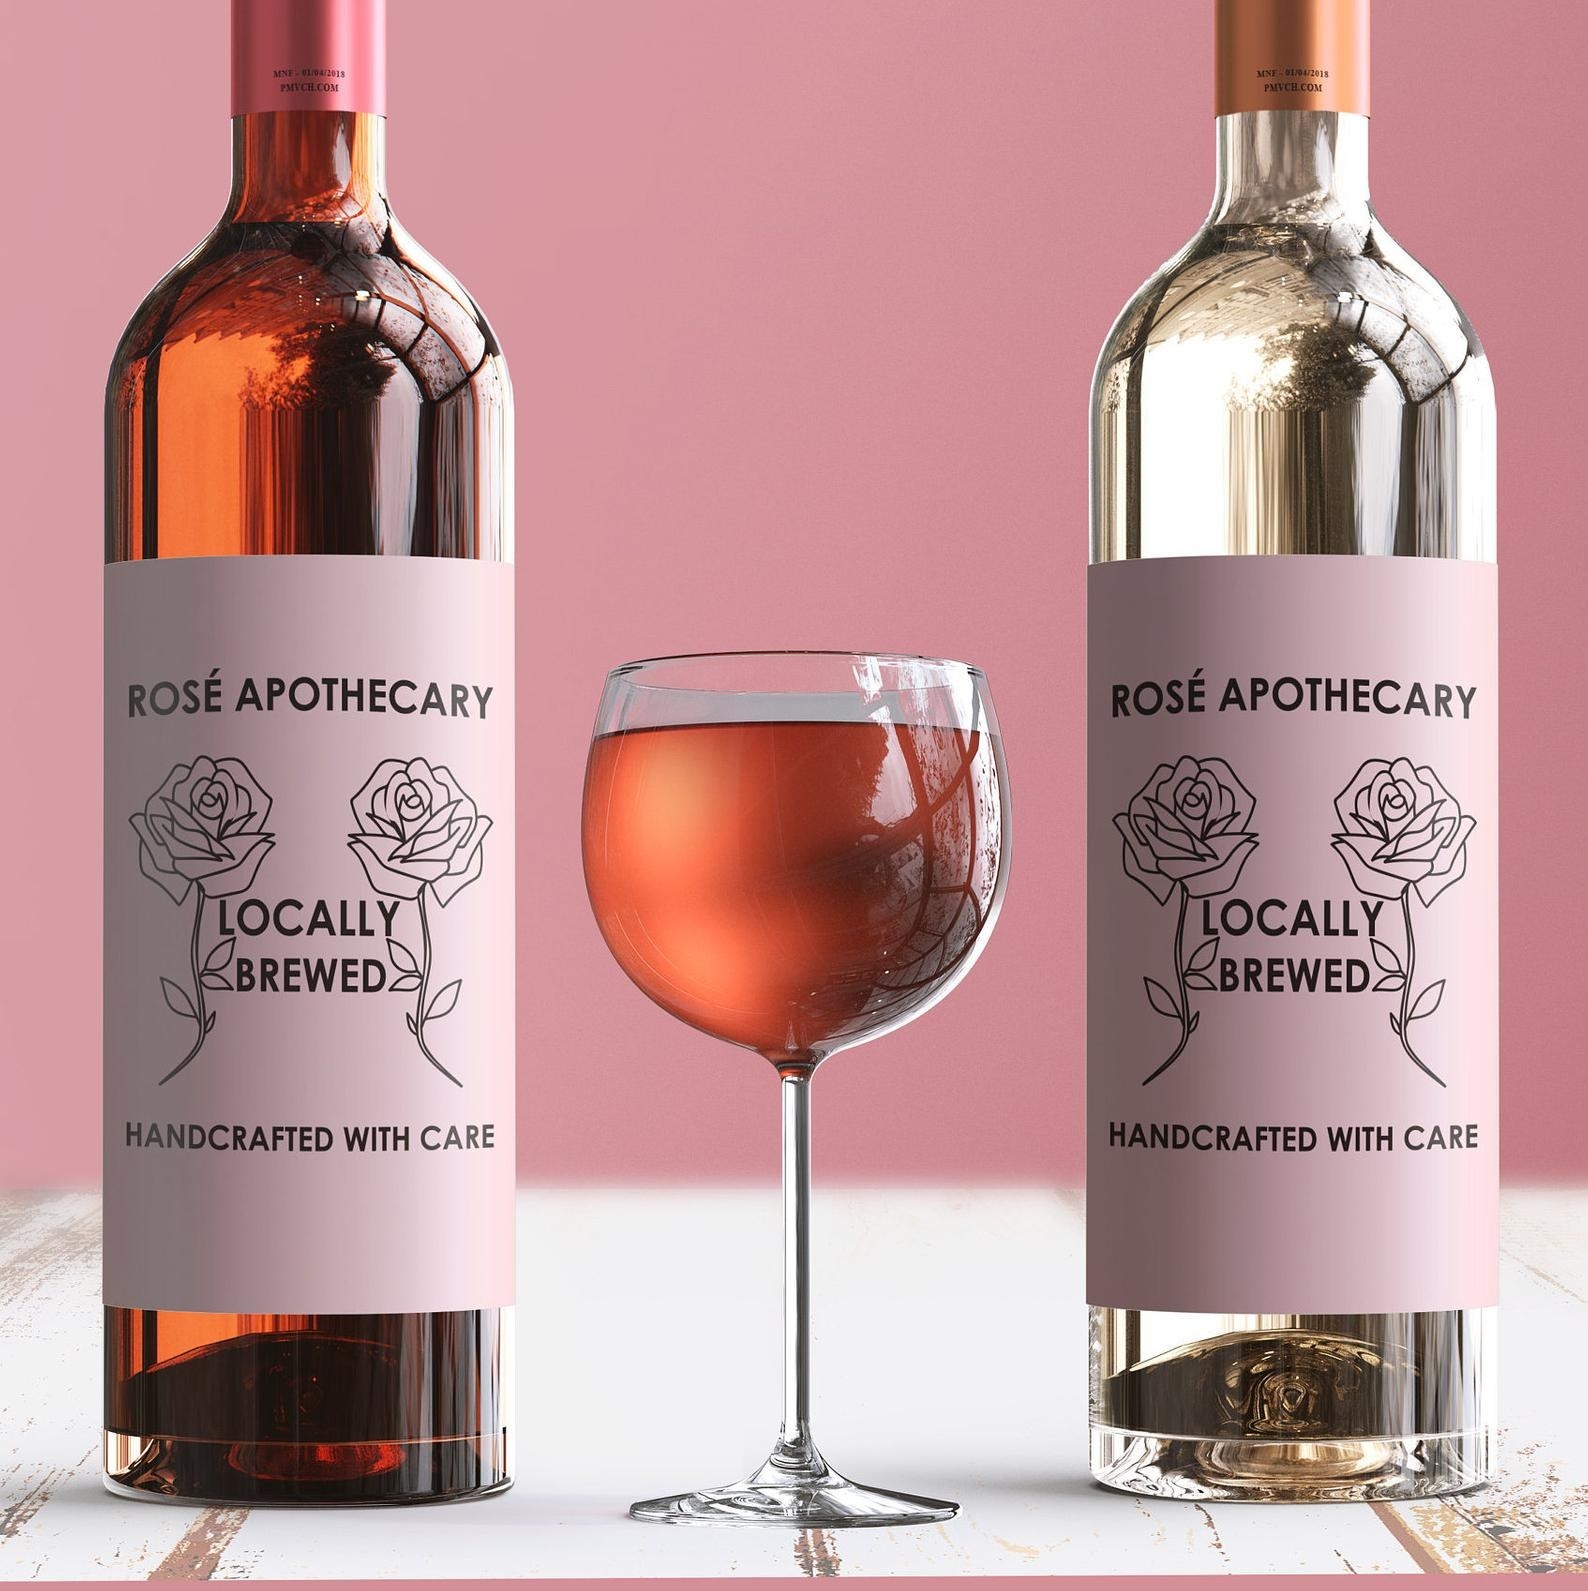 A pink wine label that says 